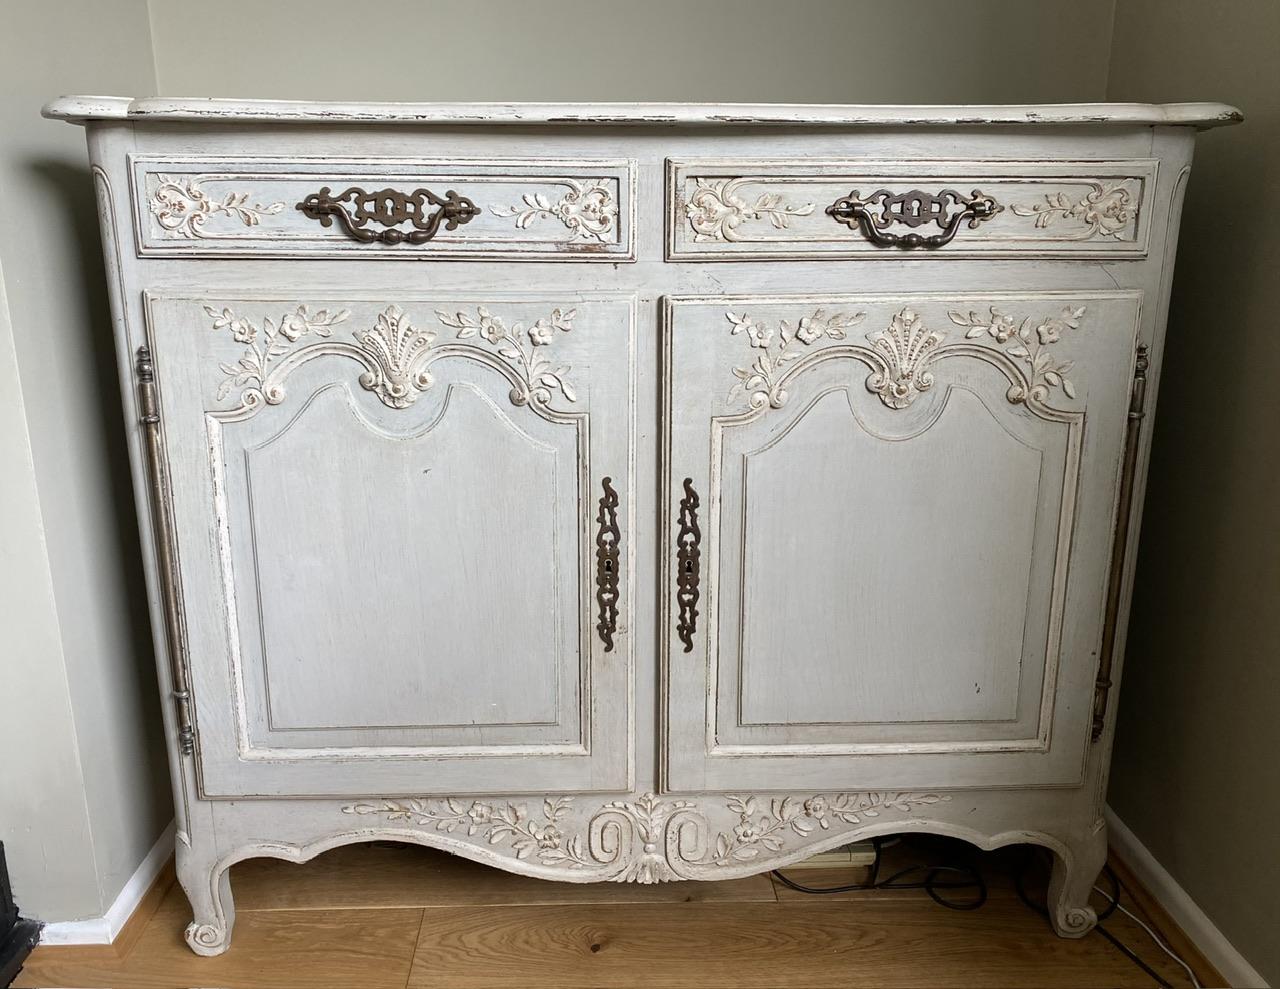 A very pretty French original painted Cupboard or Cabinet. Having 2 doors opening to reveal a single shelf inside and 2 drawers over, all fittwd with original hardware. Lovely carved decoration to the front and finished in its original paint finish